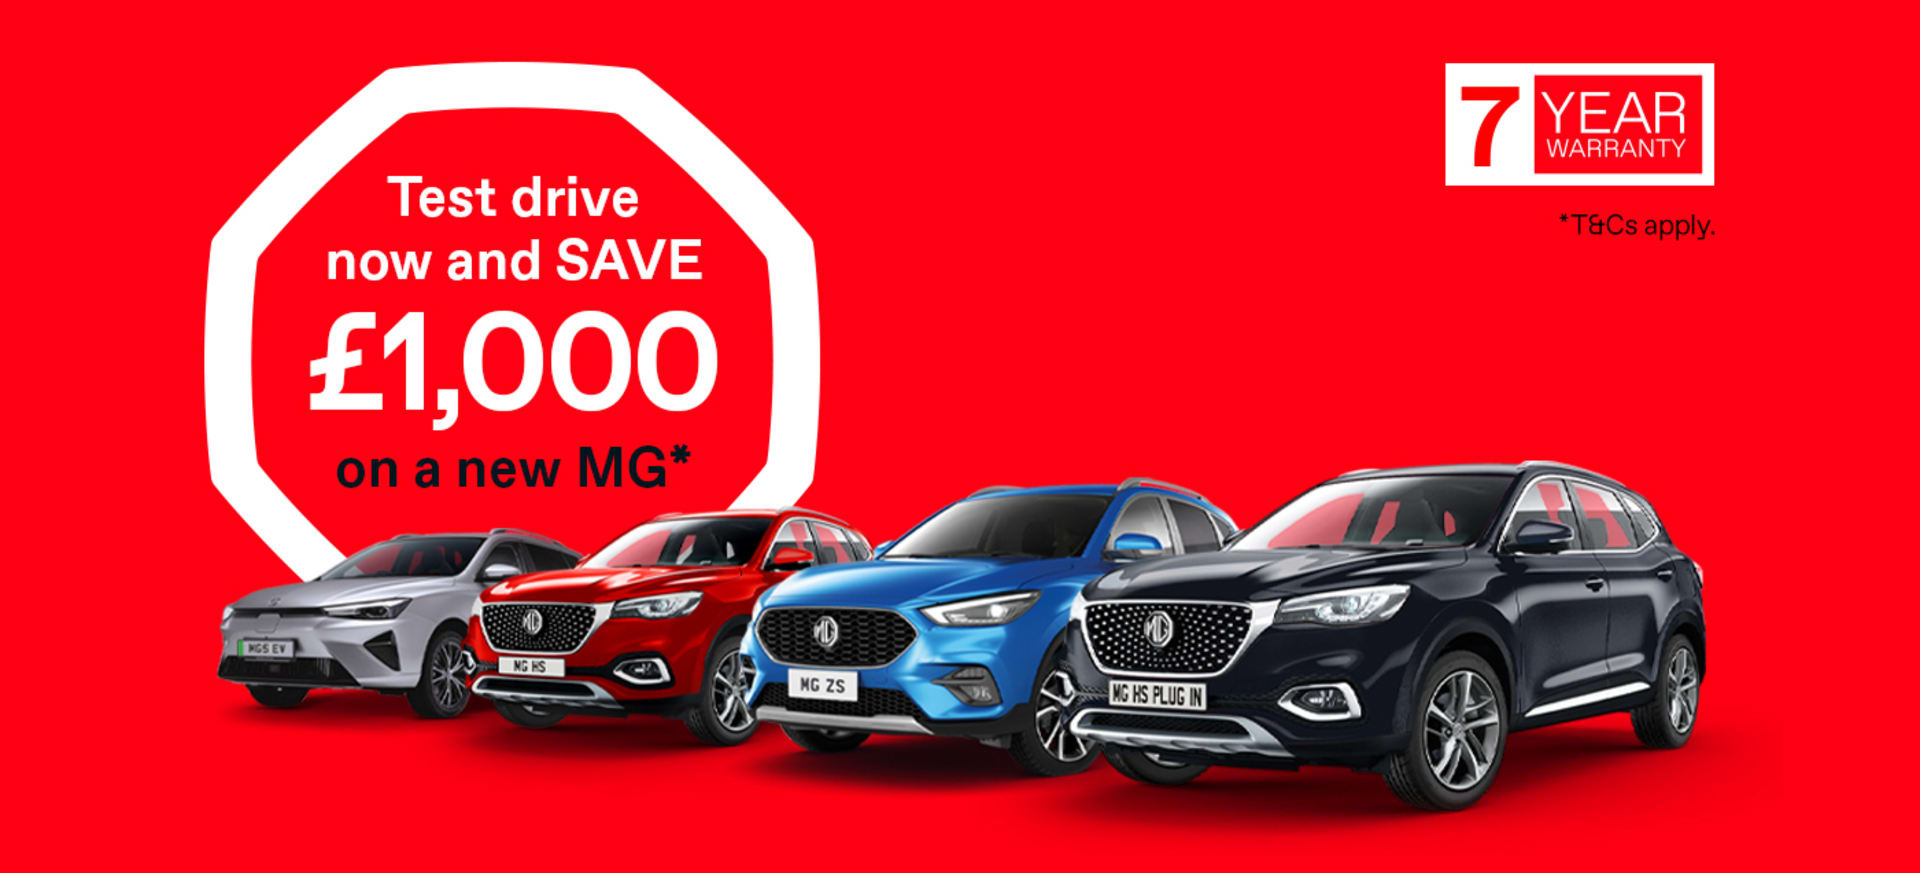 £1,000 OFF A BRAND NEW MG